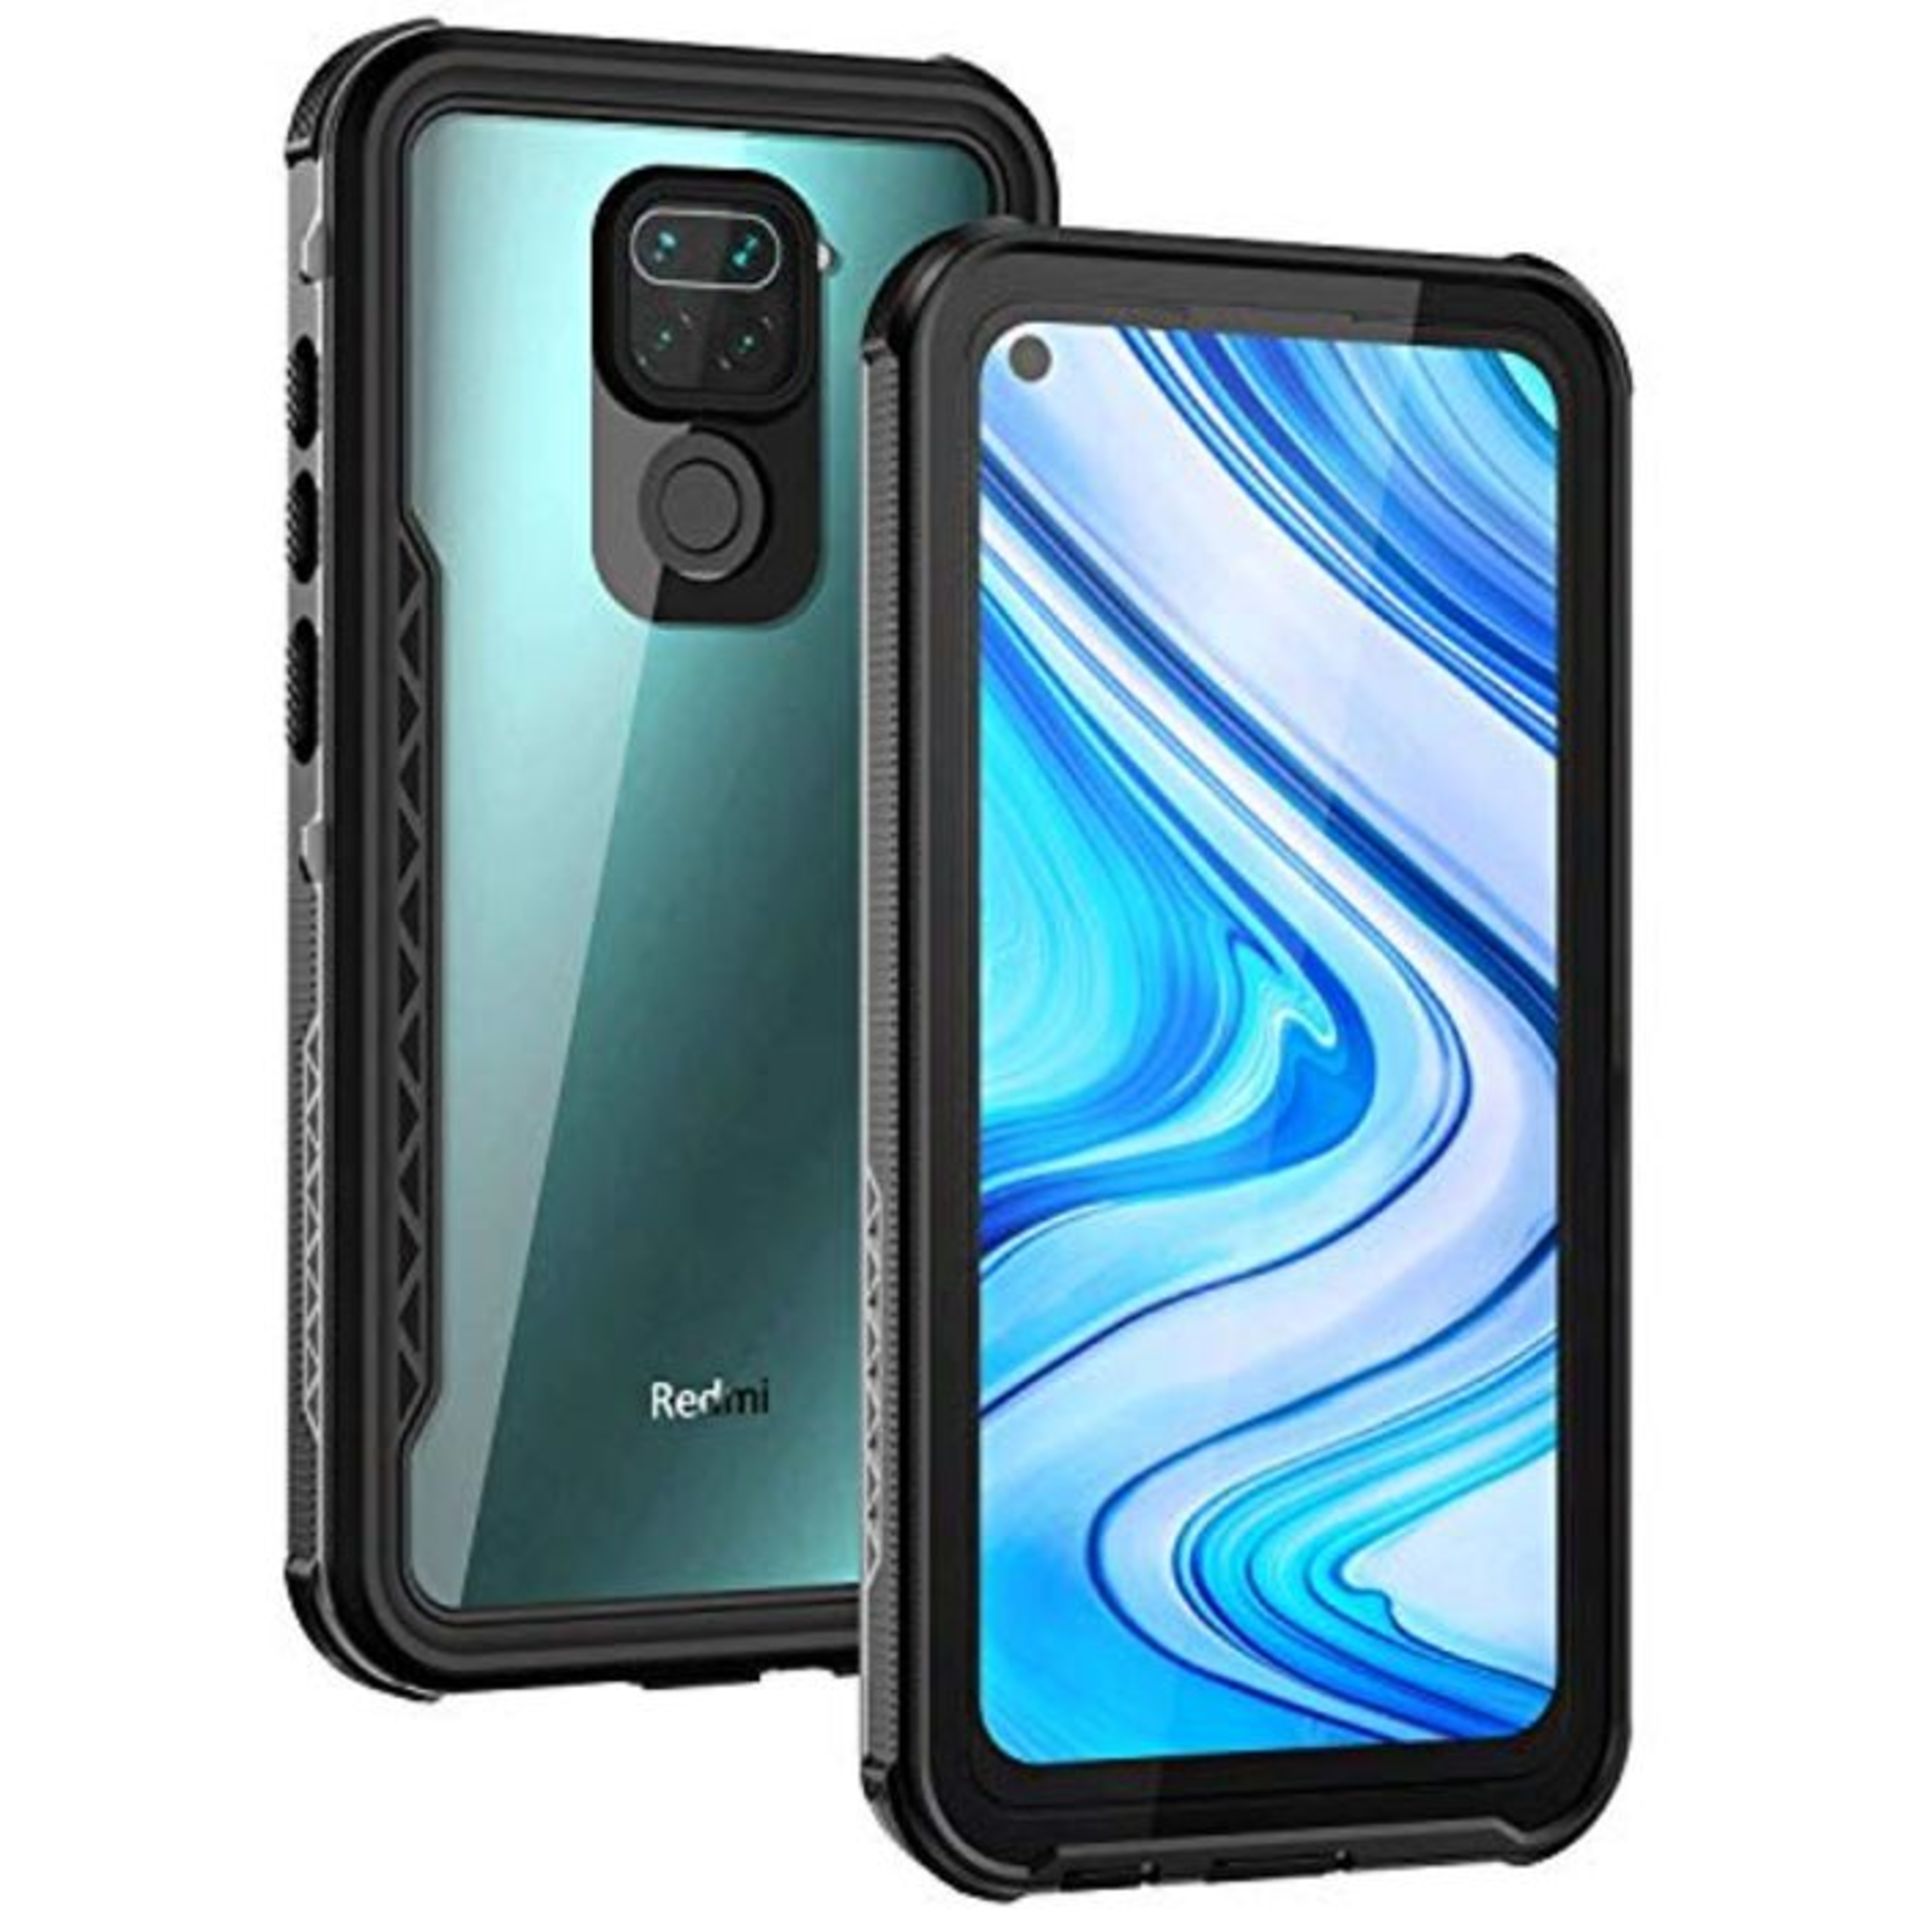 Focusor For Redmi Note 9 case, IP68 waterproof mobile phone case.